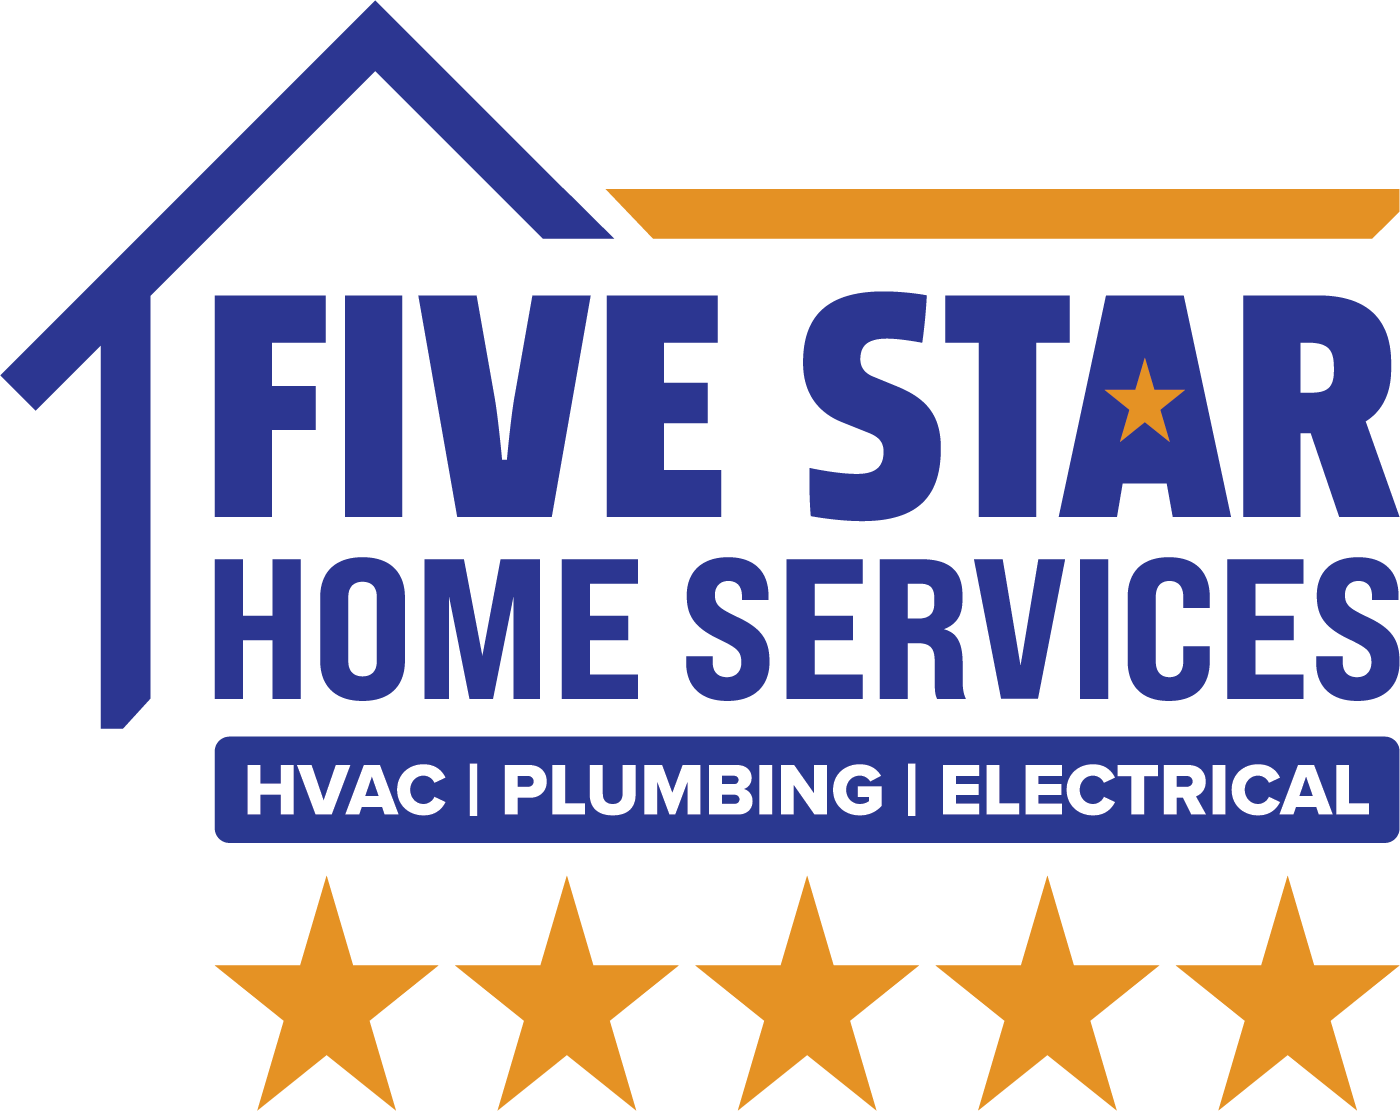 Five Star Home Services logo